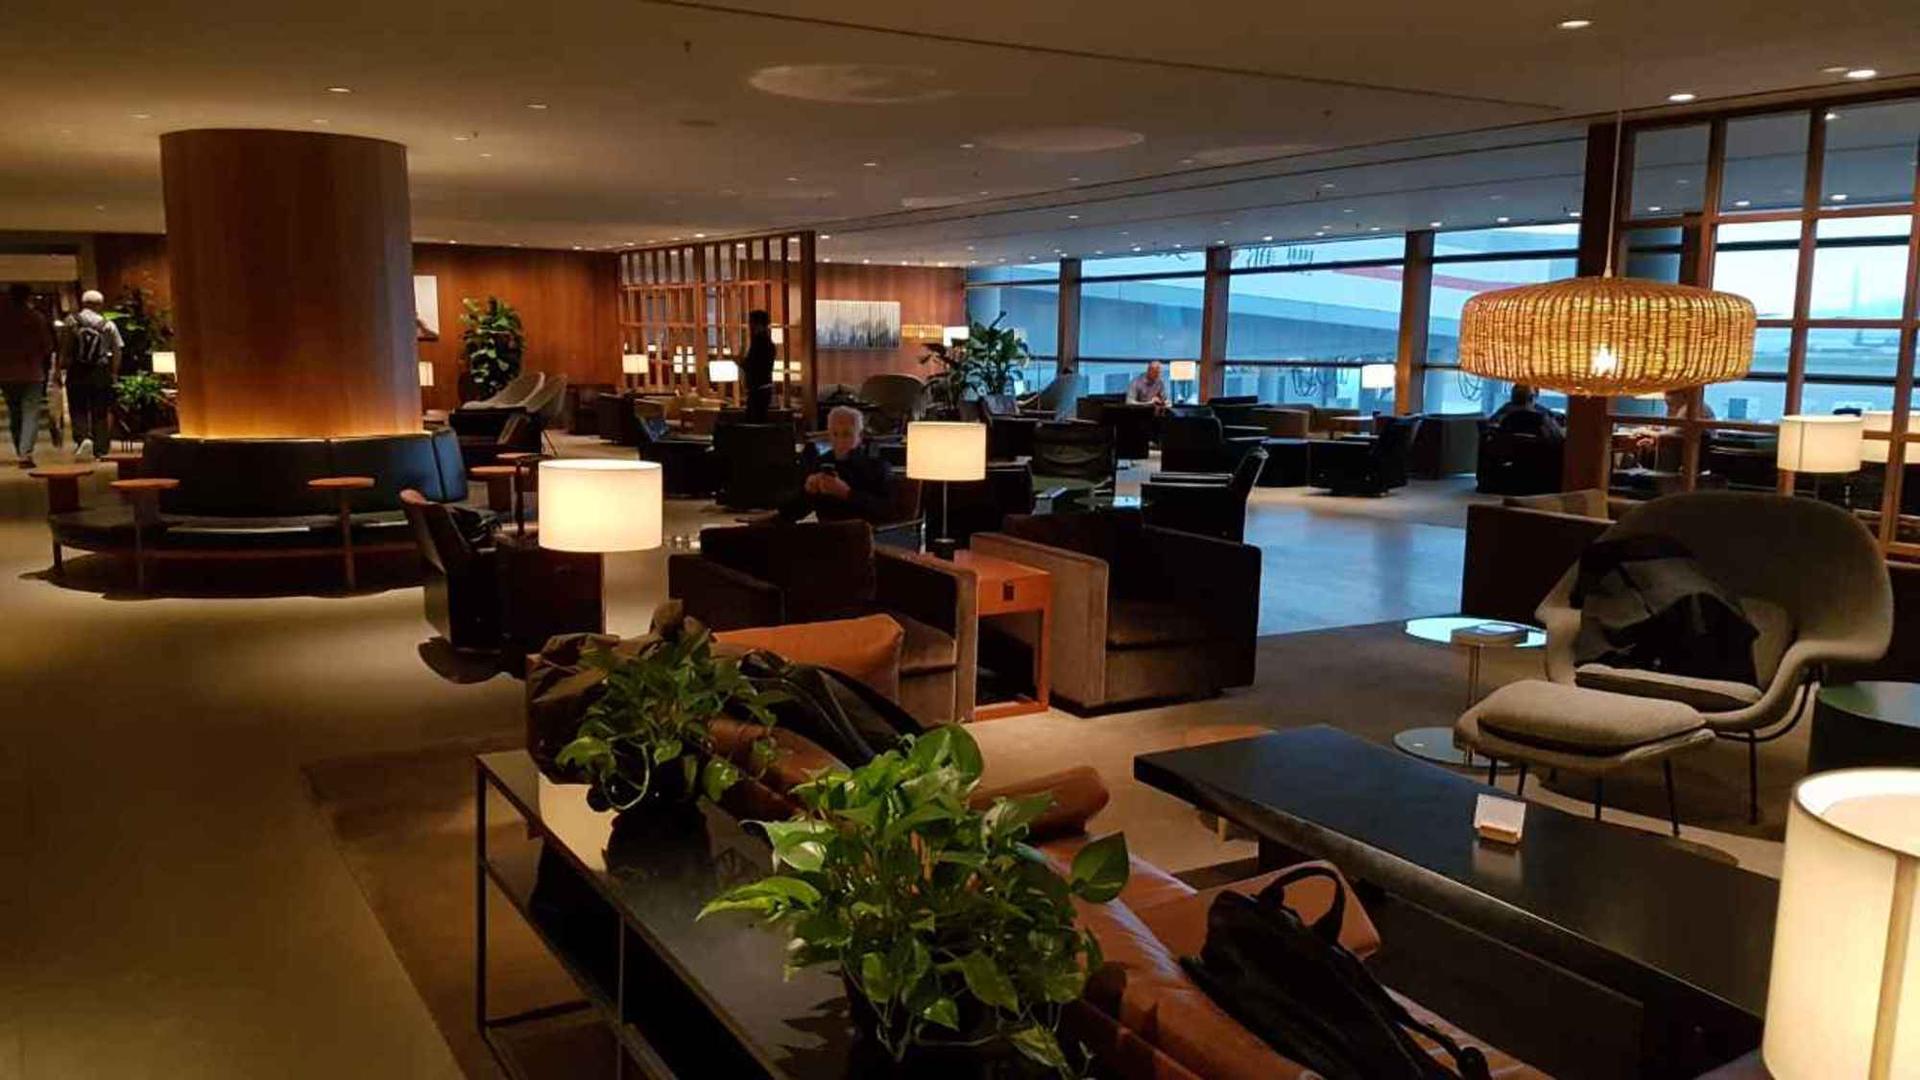 Cathay Pacific The Pier Business Class Lounge image 20 of 61